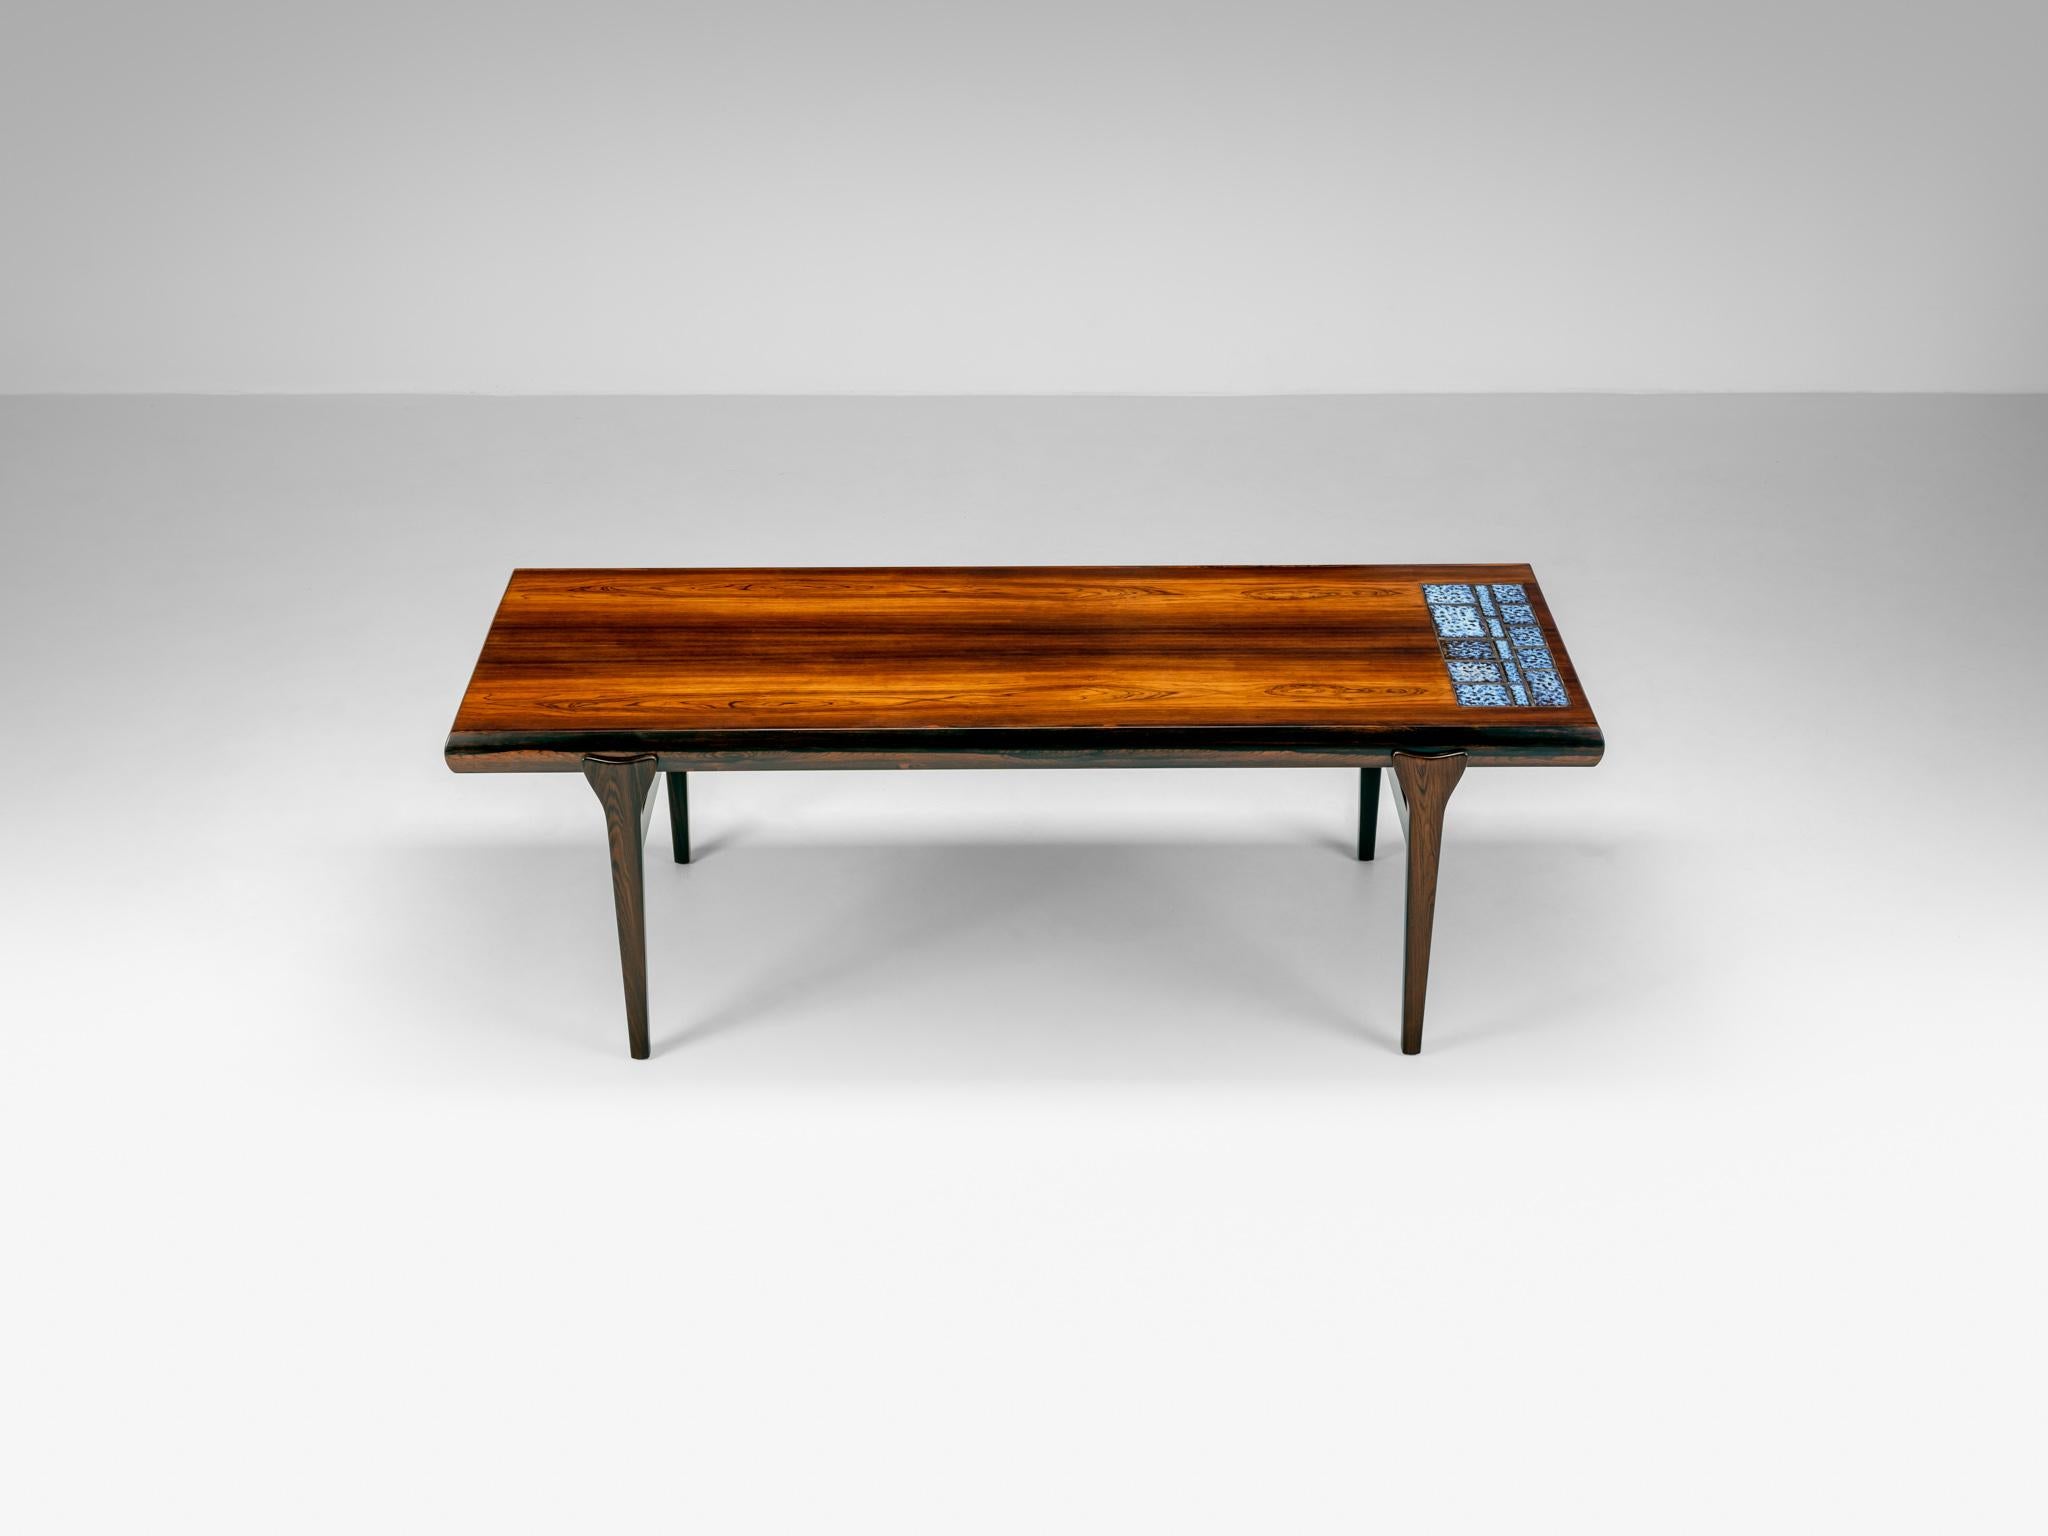 Vintage Brazilian rosewood/palisander coffee table designed by Johannes Andersen and produced by Silkeborg Møbelfabrik in Denmark c1960. This elegant coffee table features a beautiful natural rosewood grain and can extend with a drawers on one side